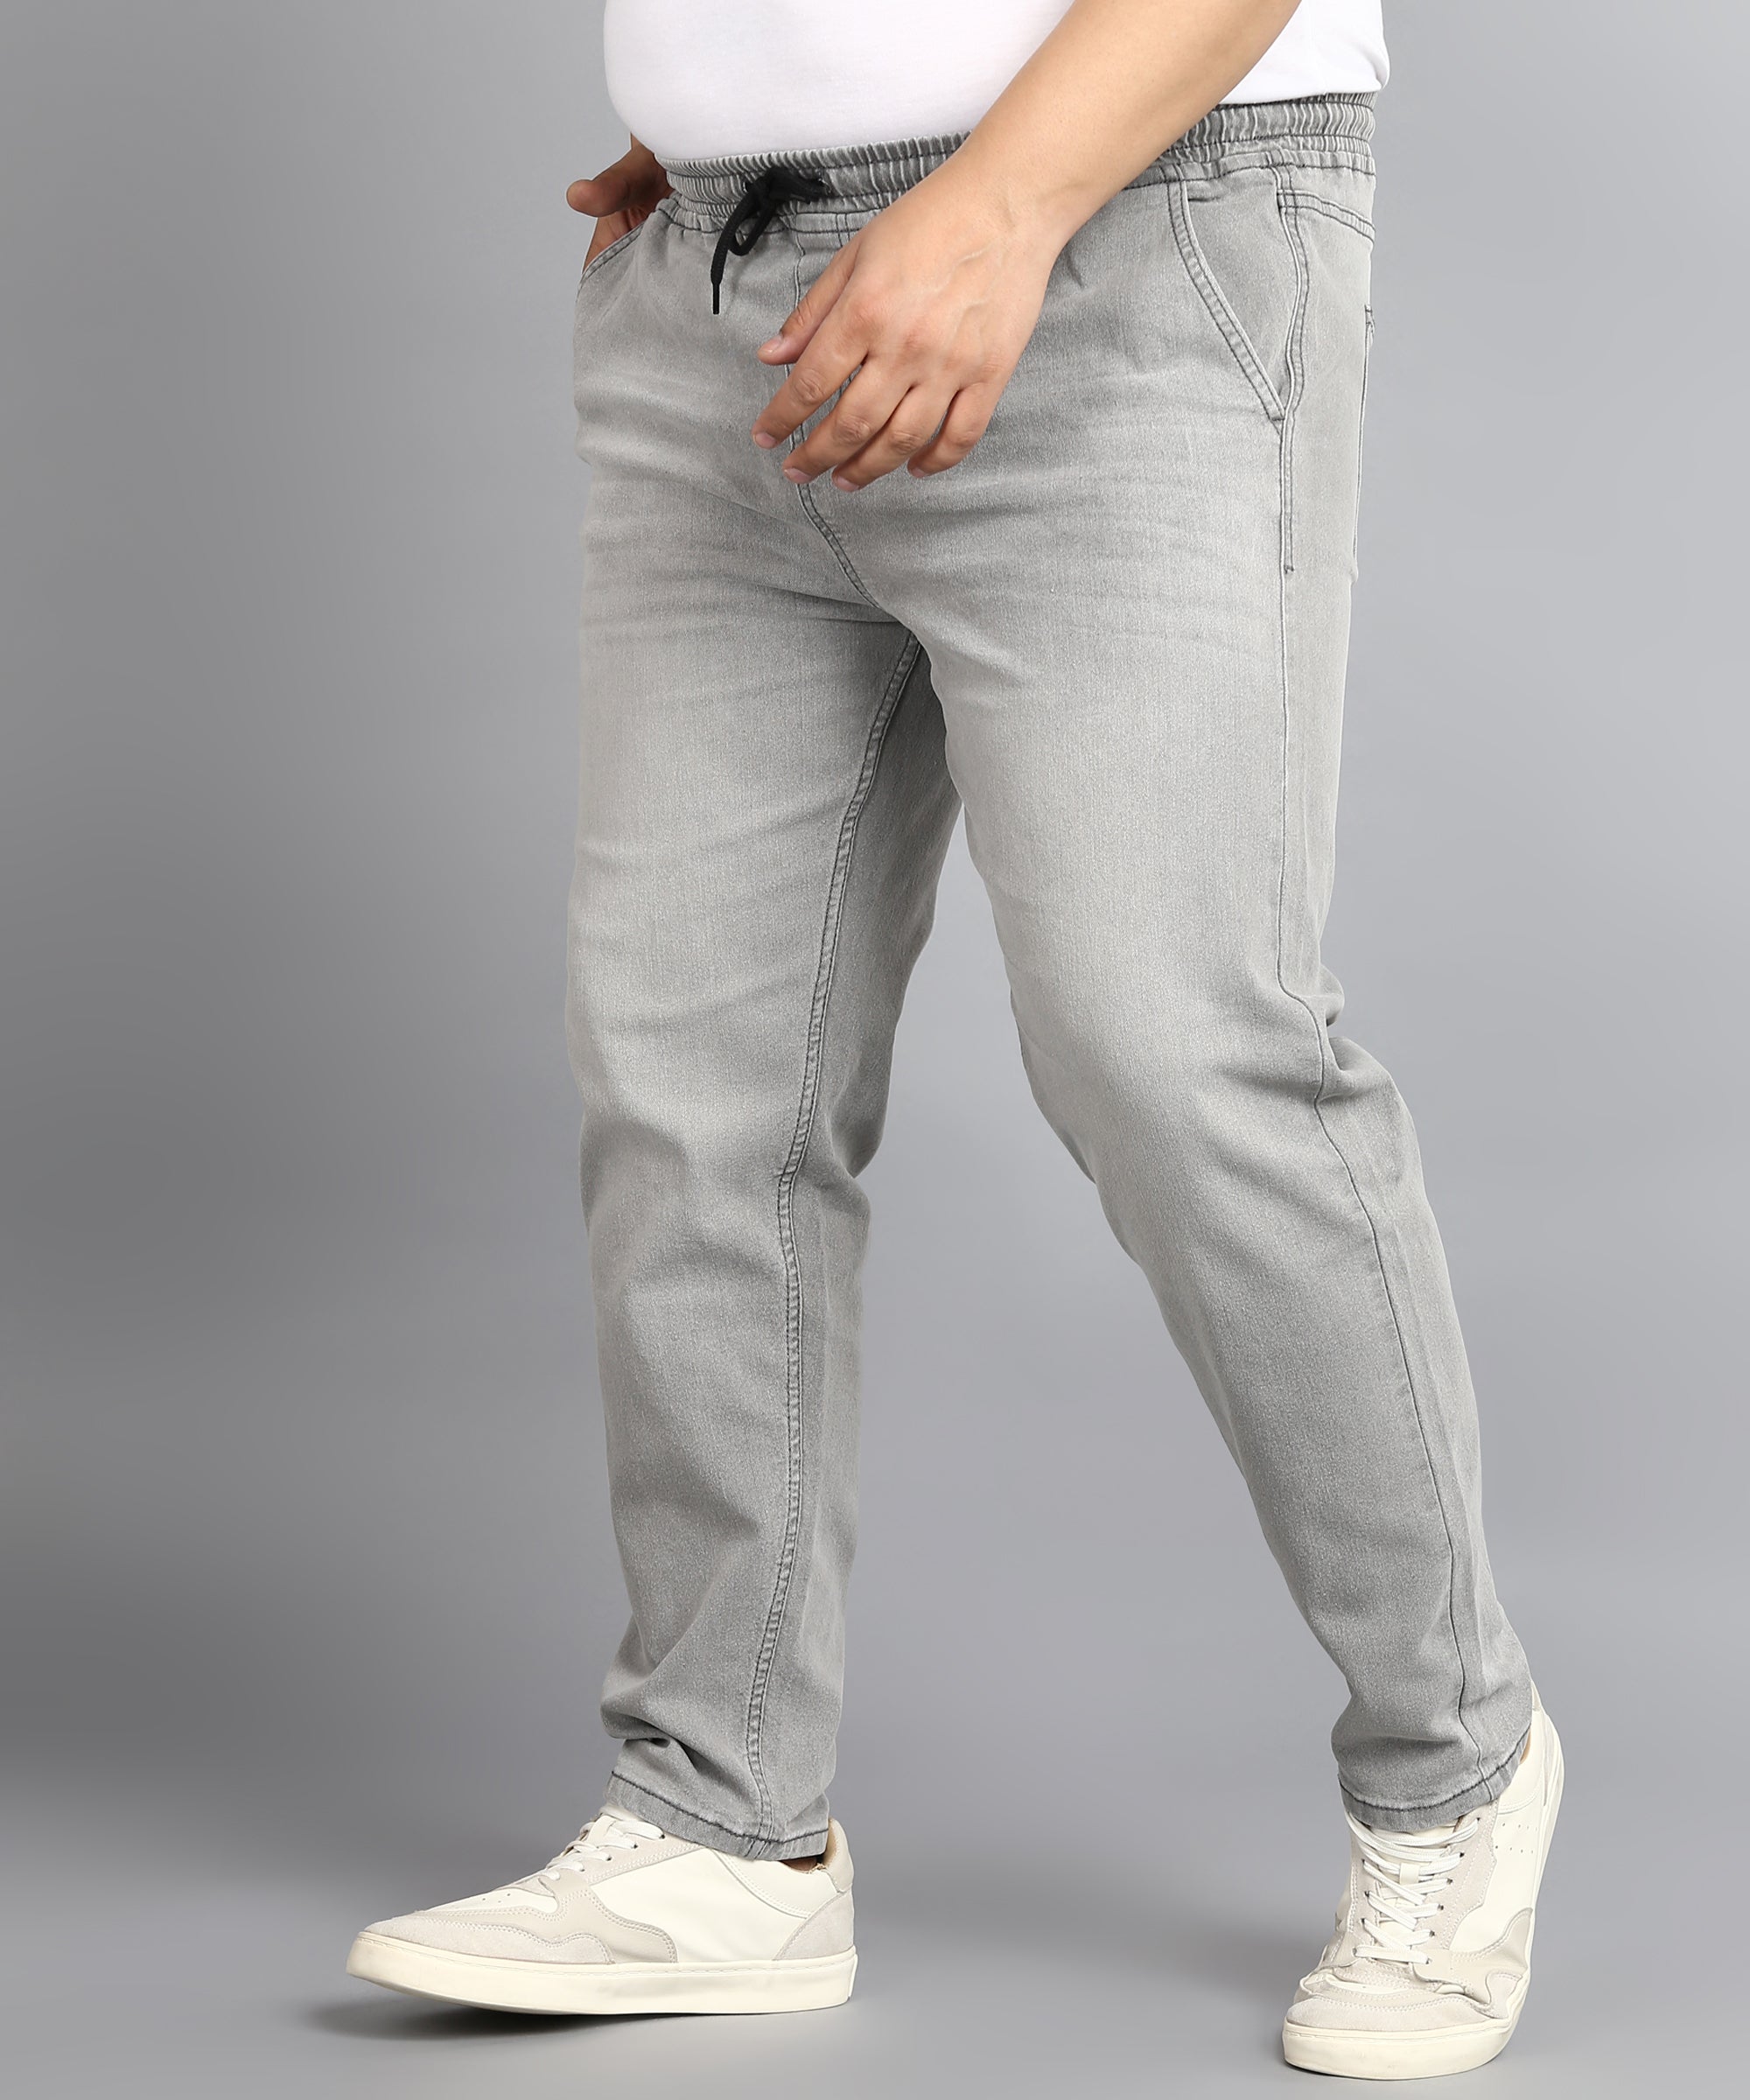 Urbano Plus Men's Ice Grey Regular Fit Washed Jogger Jeans Stretchable